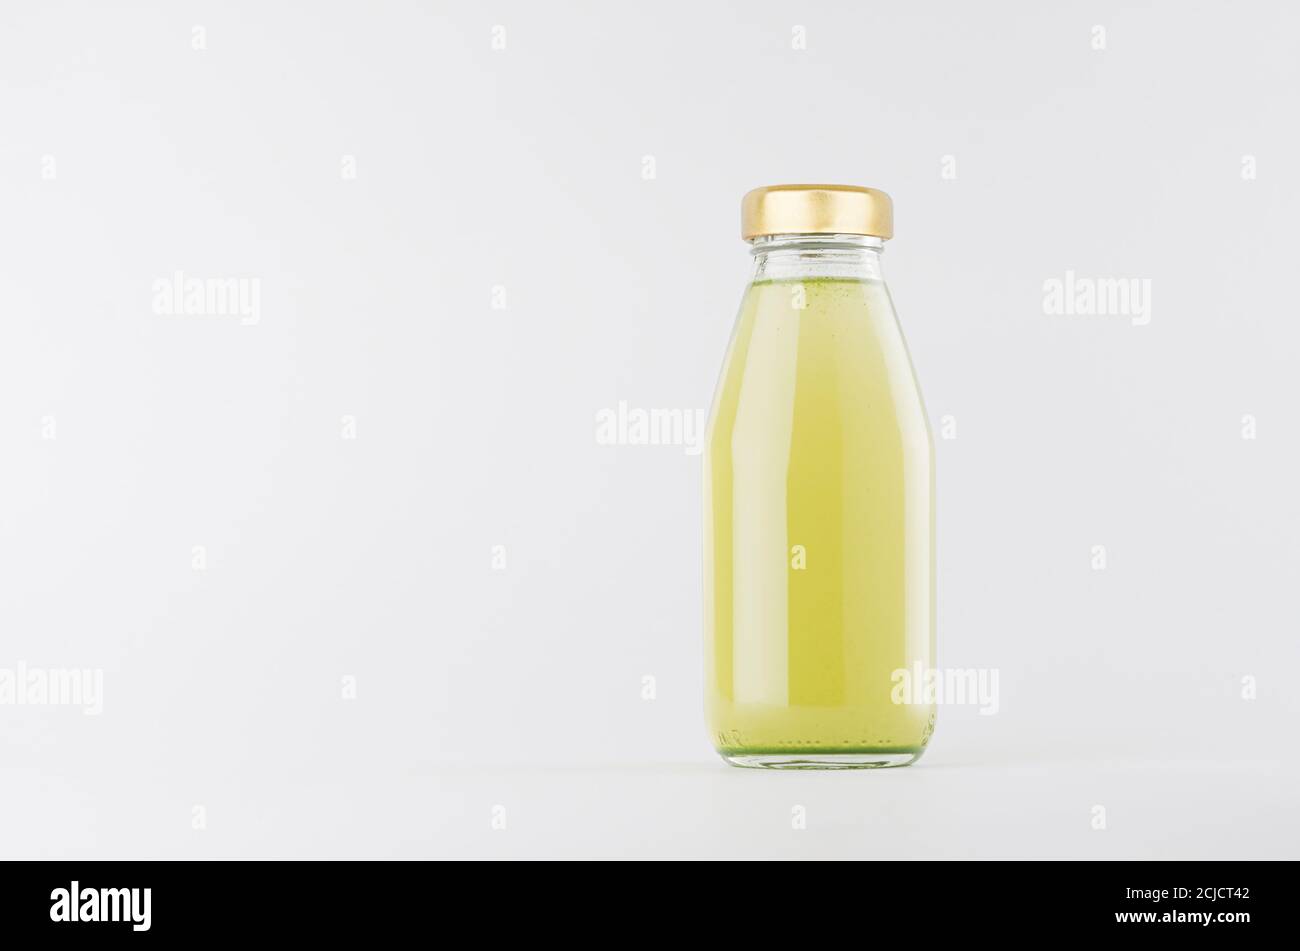 Download Page 6 Bottle Juice Cap High Resolution Stock Photography And Images Alamy